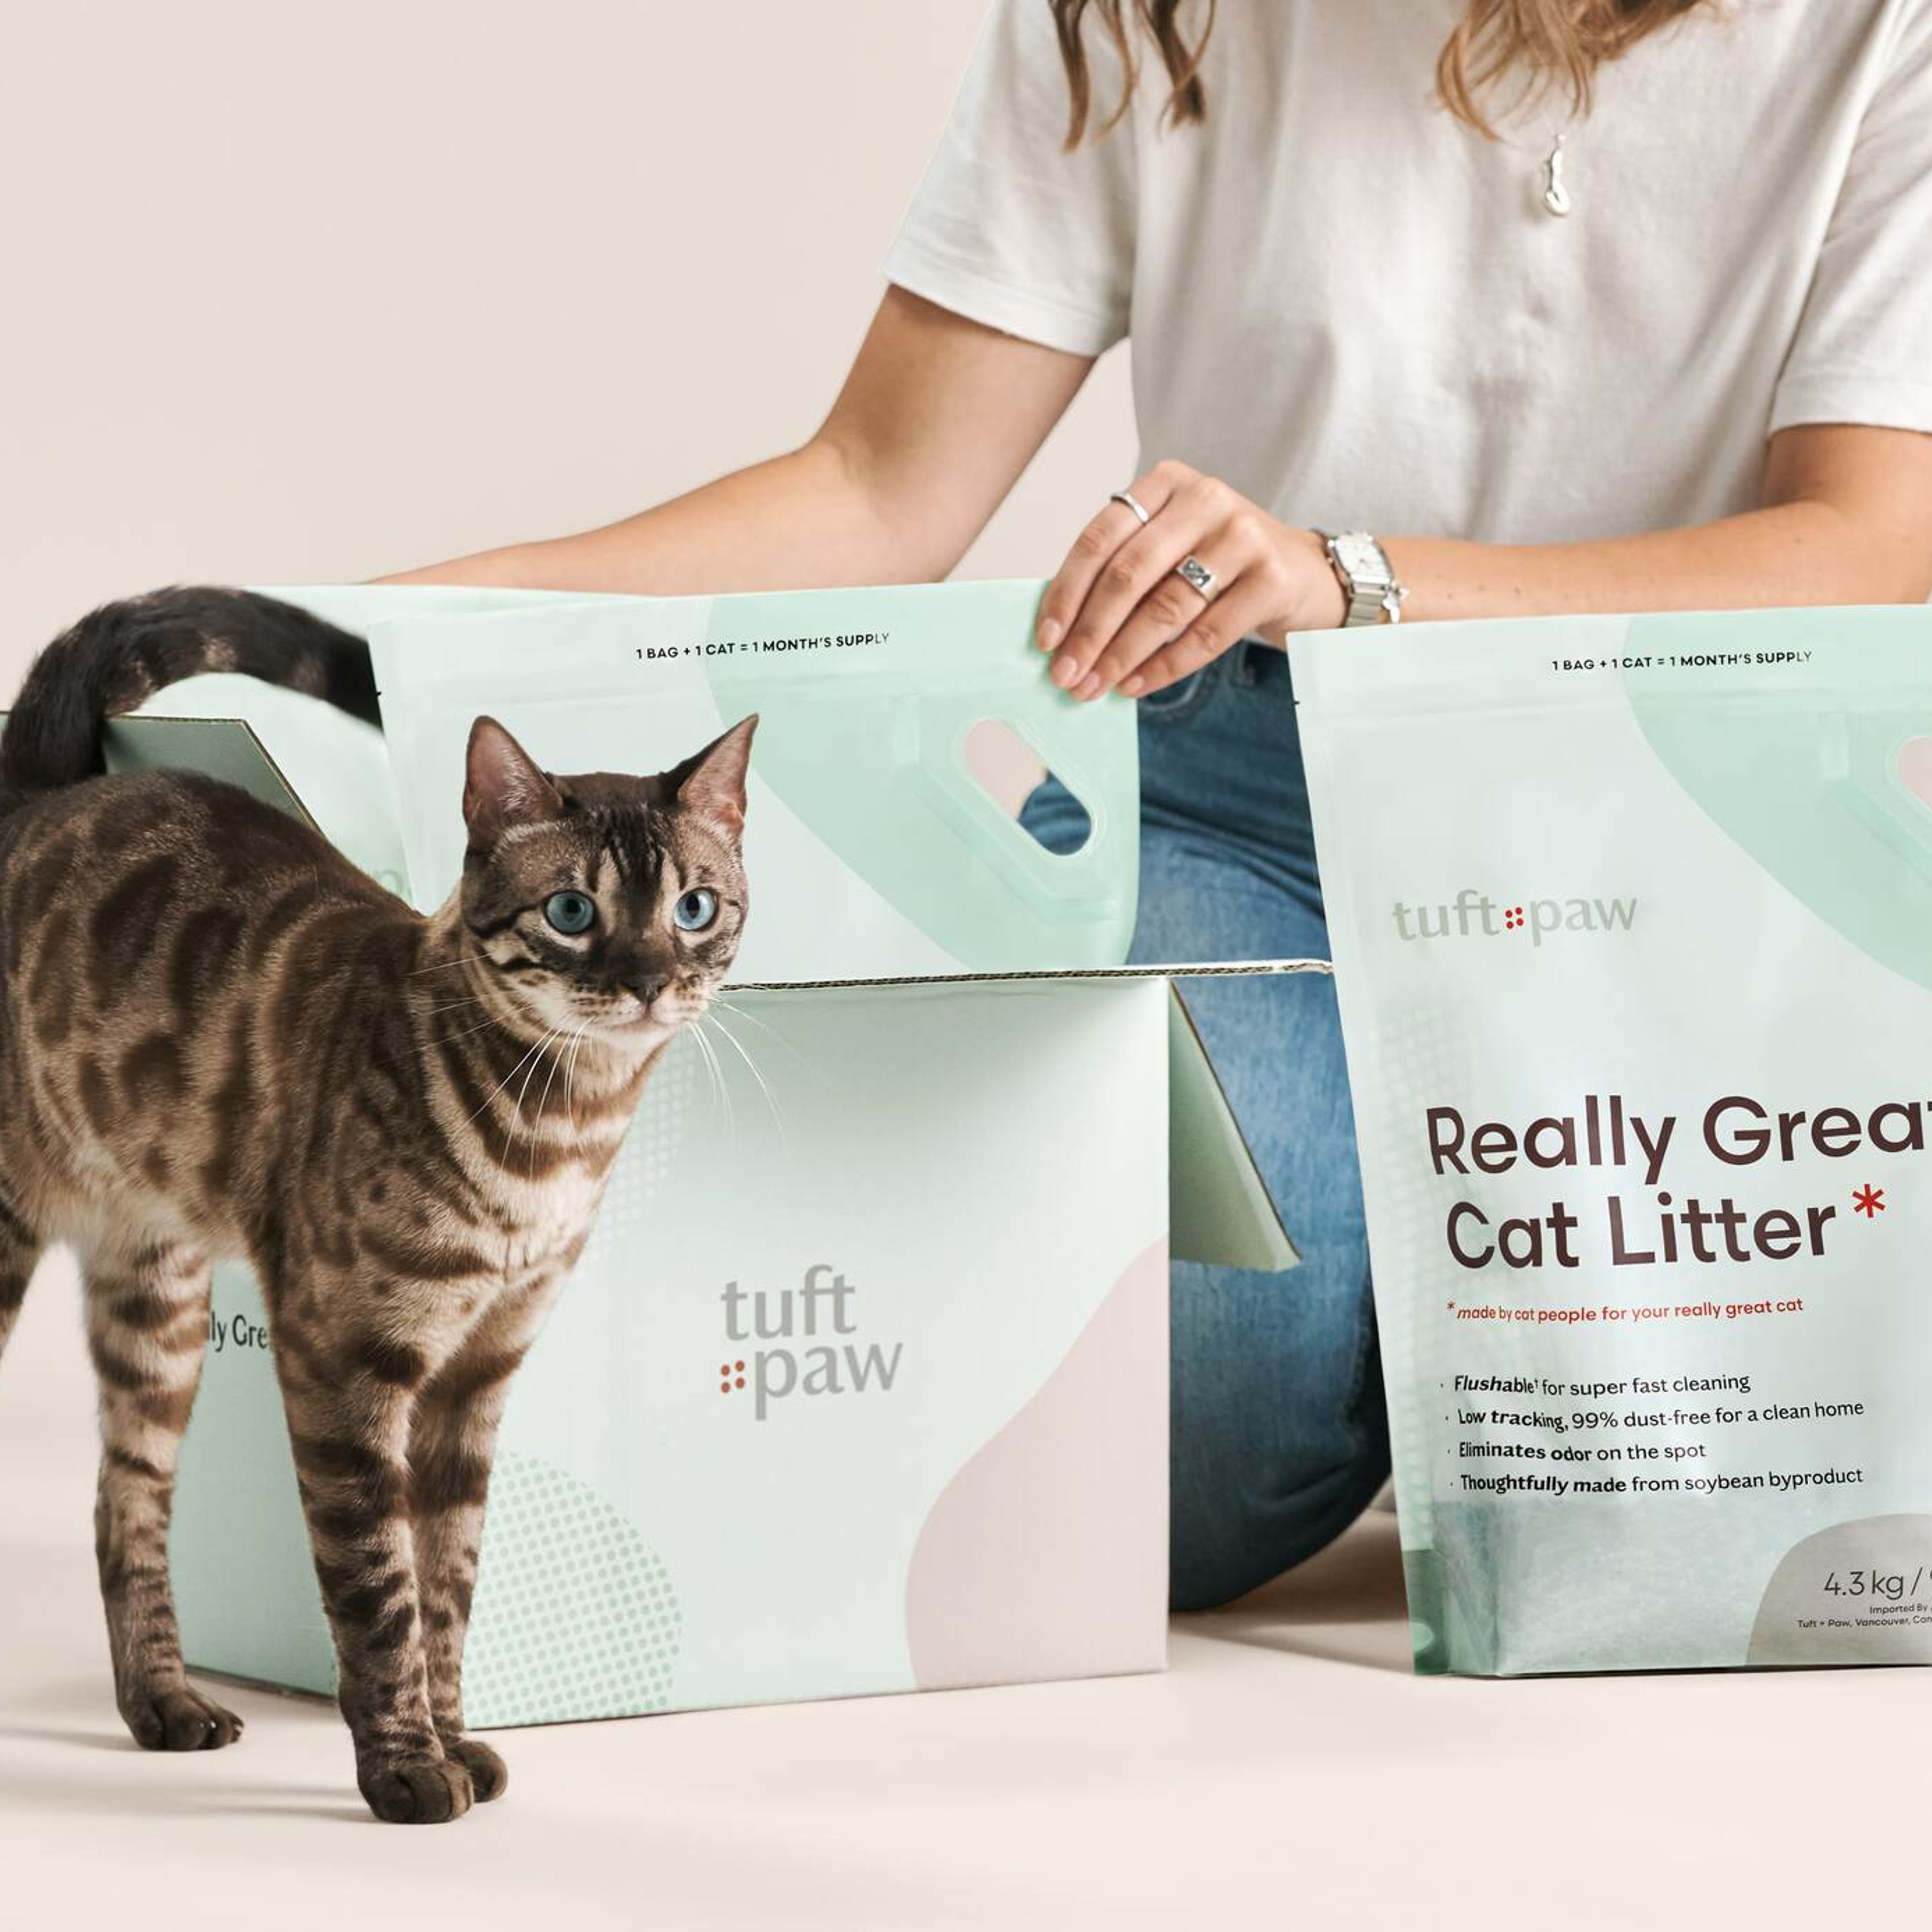 Really Great Cat Litter